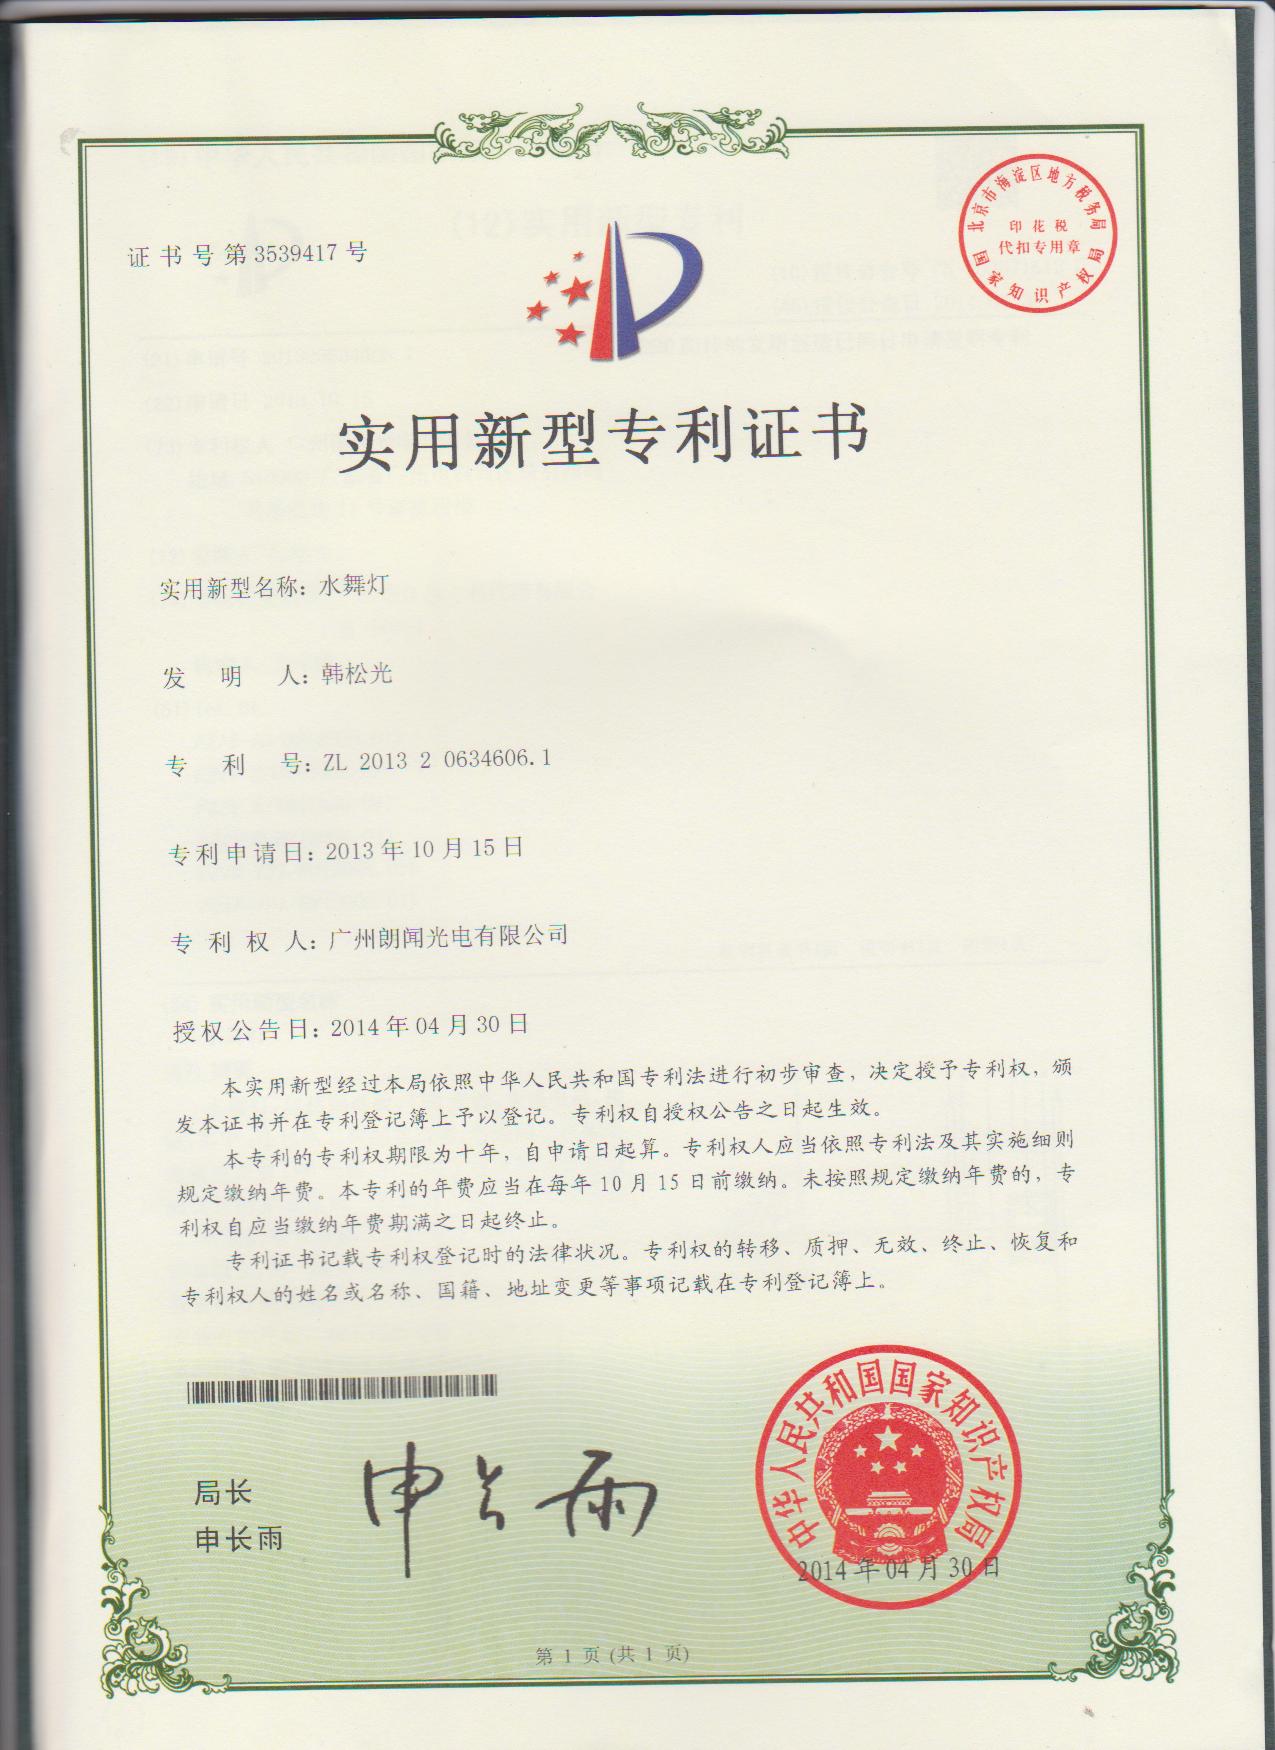 Patent certificate for waterdance light